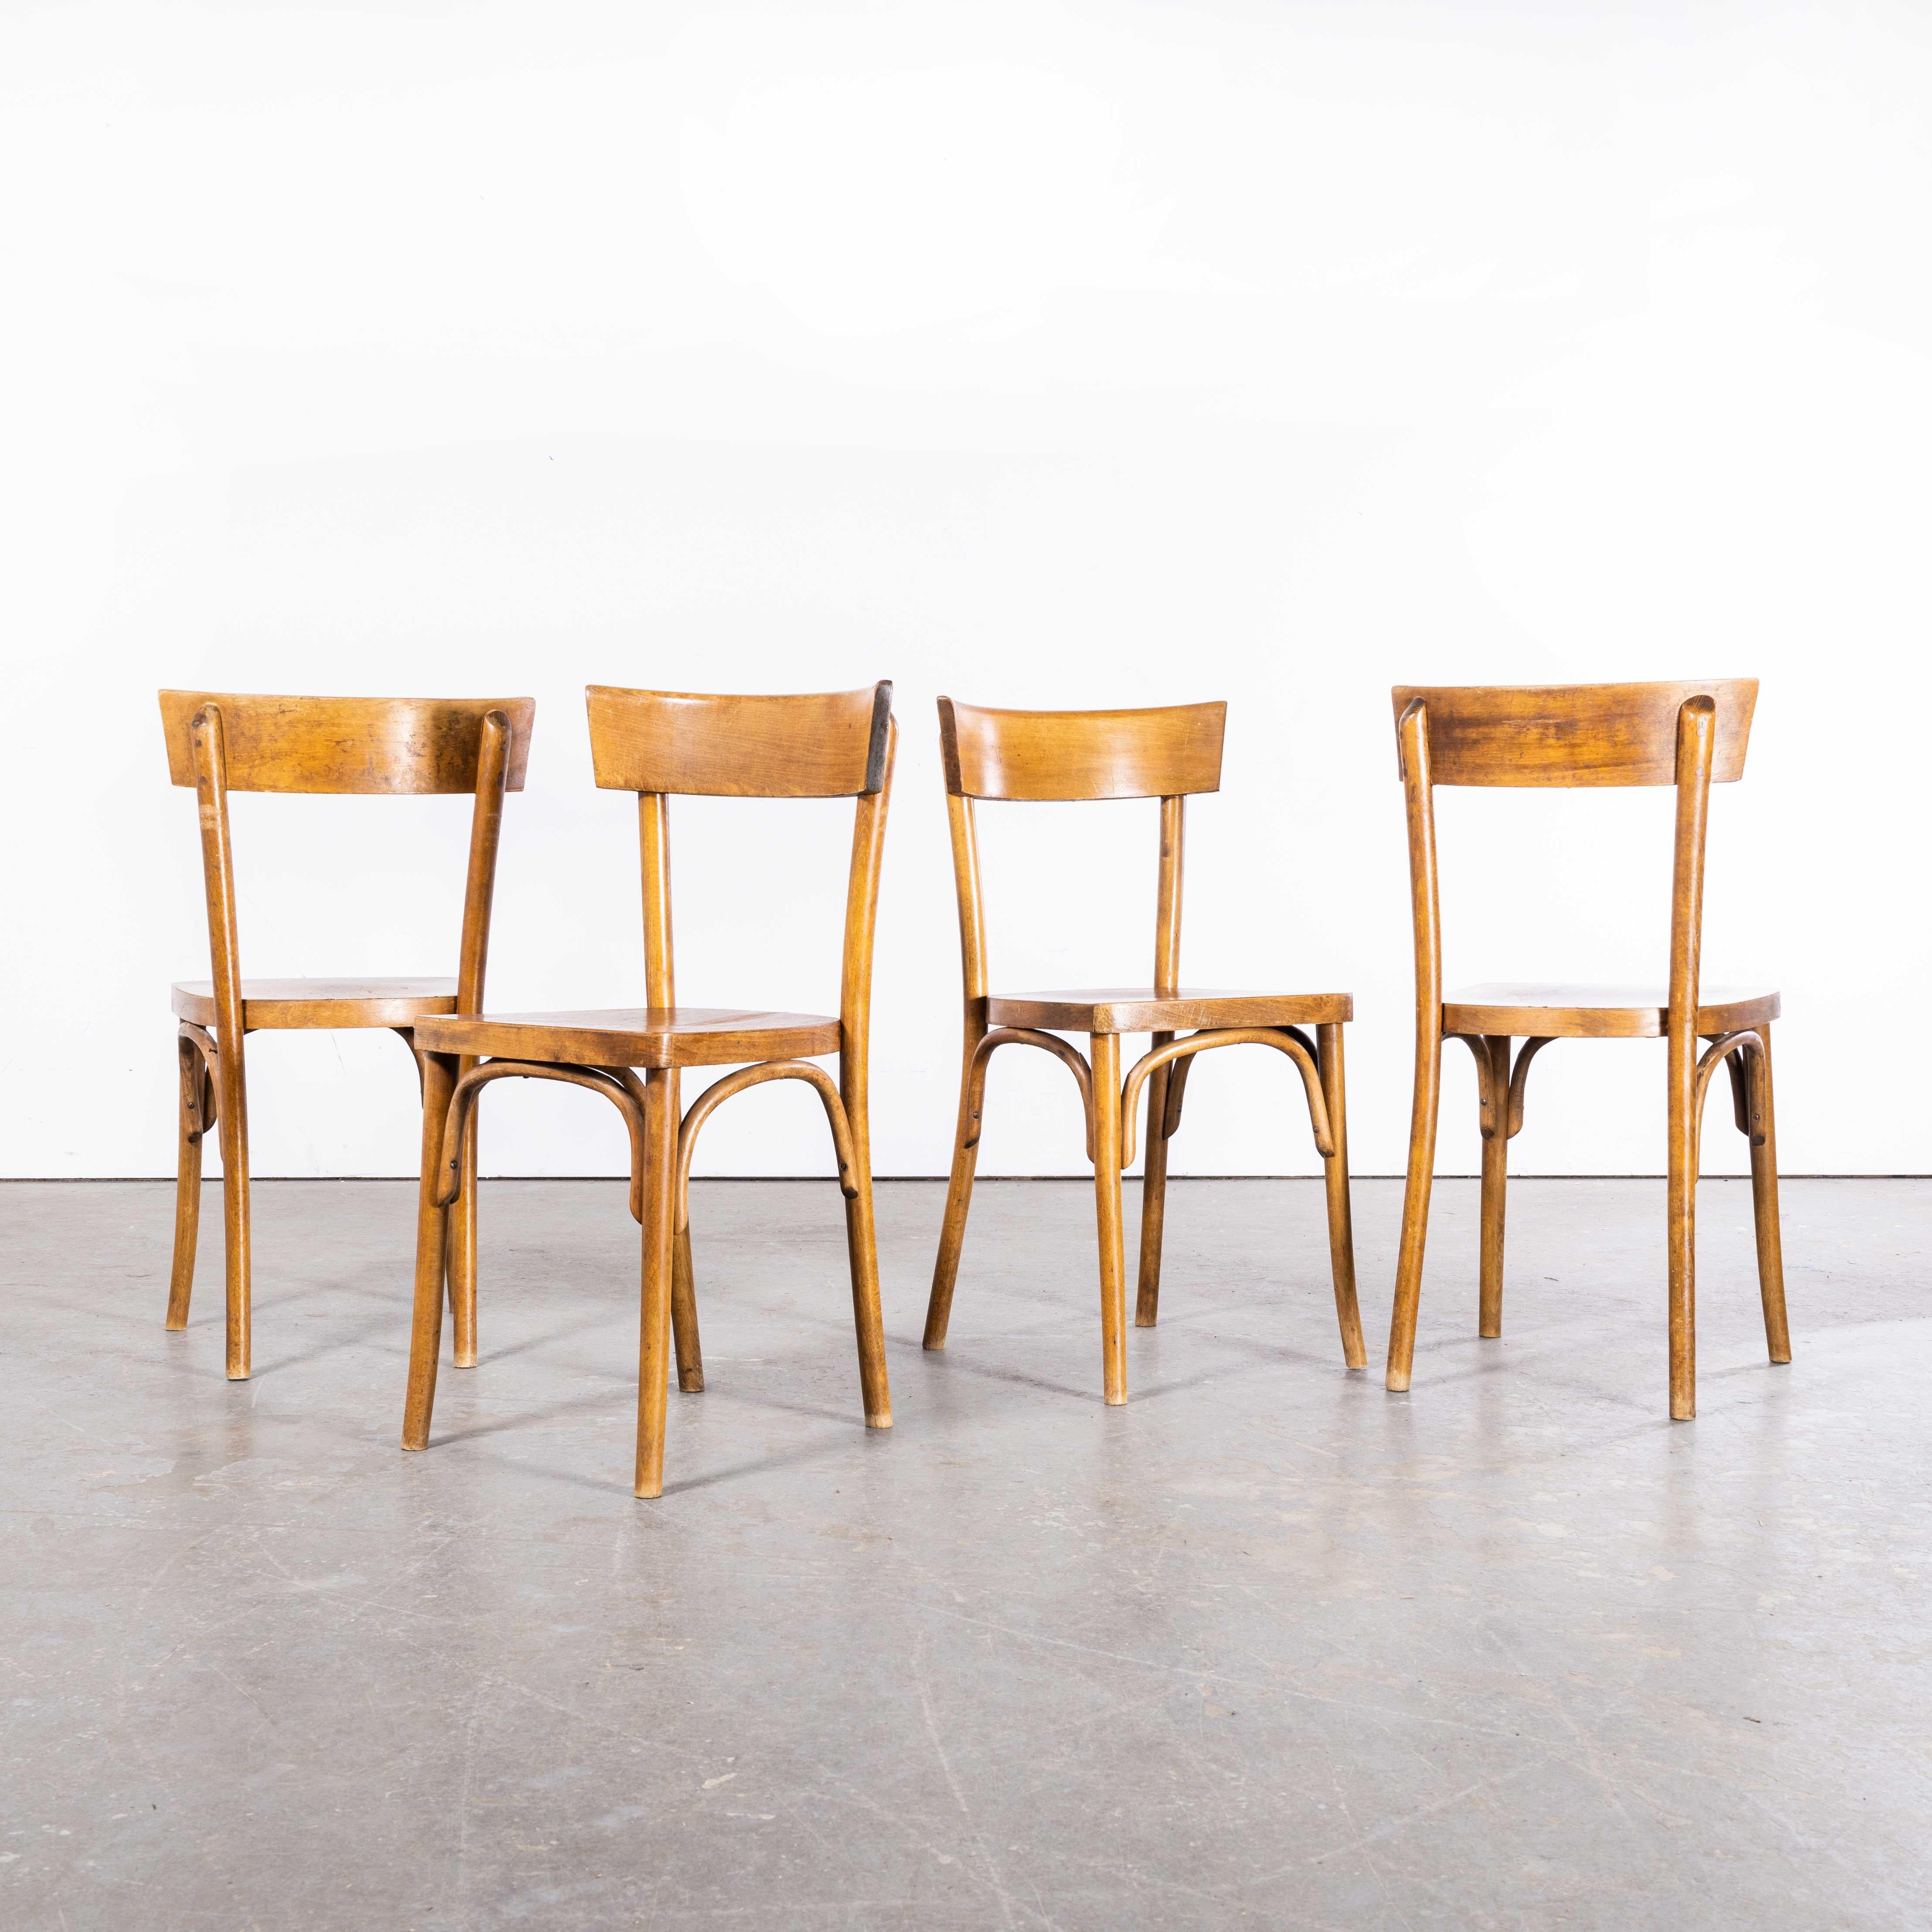 European 1950s Bentwood Mid Tan Single Bar Back Dining Chairs – Set of Four '2582' For Sale